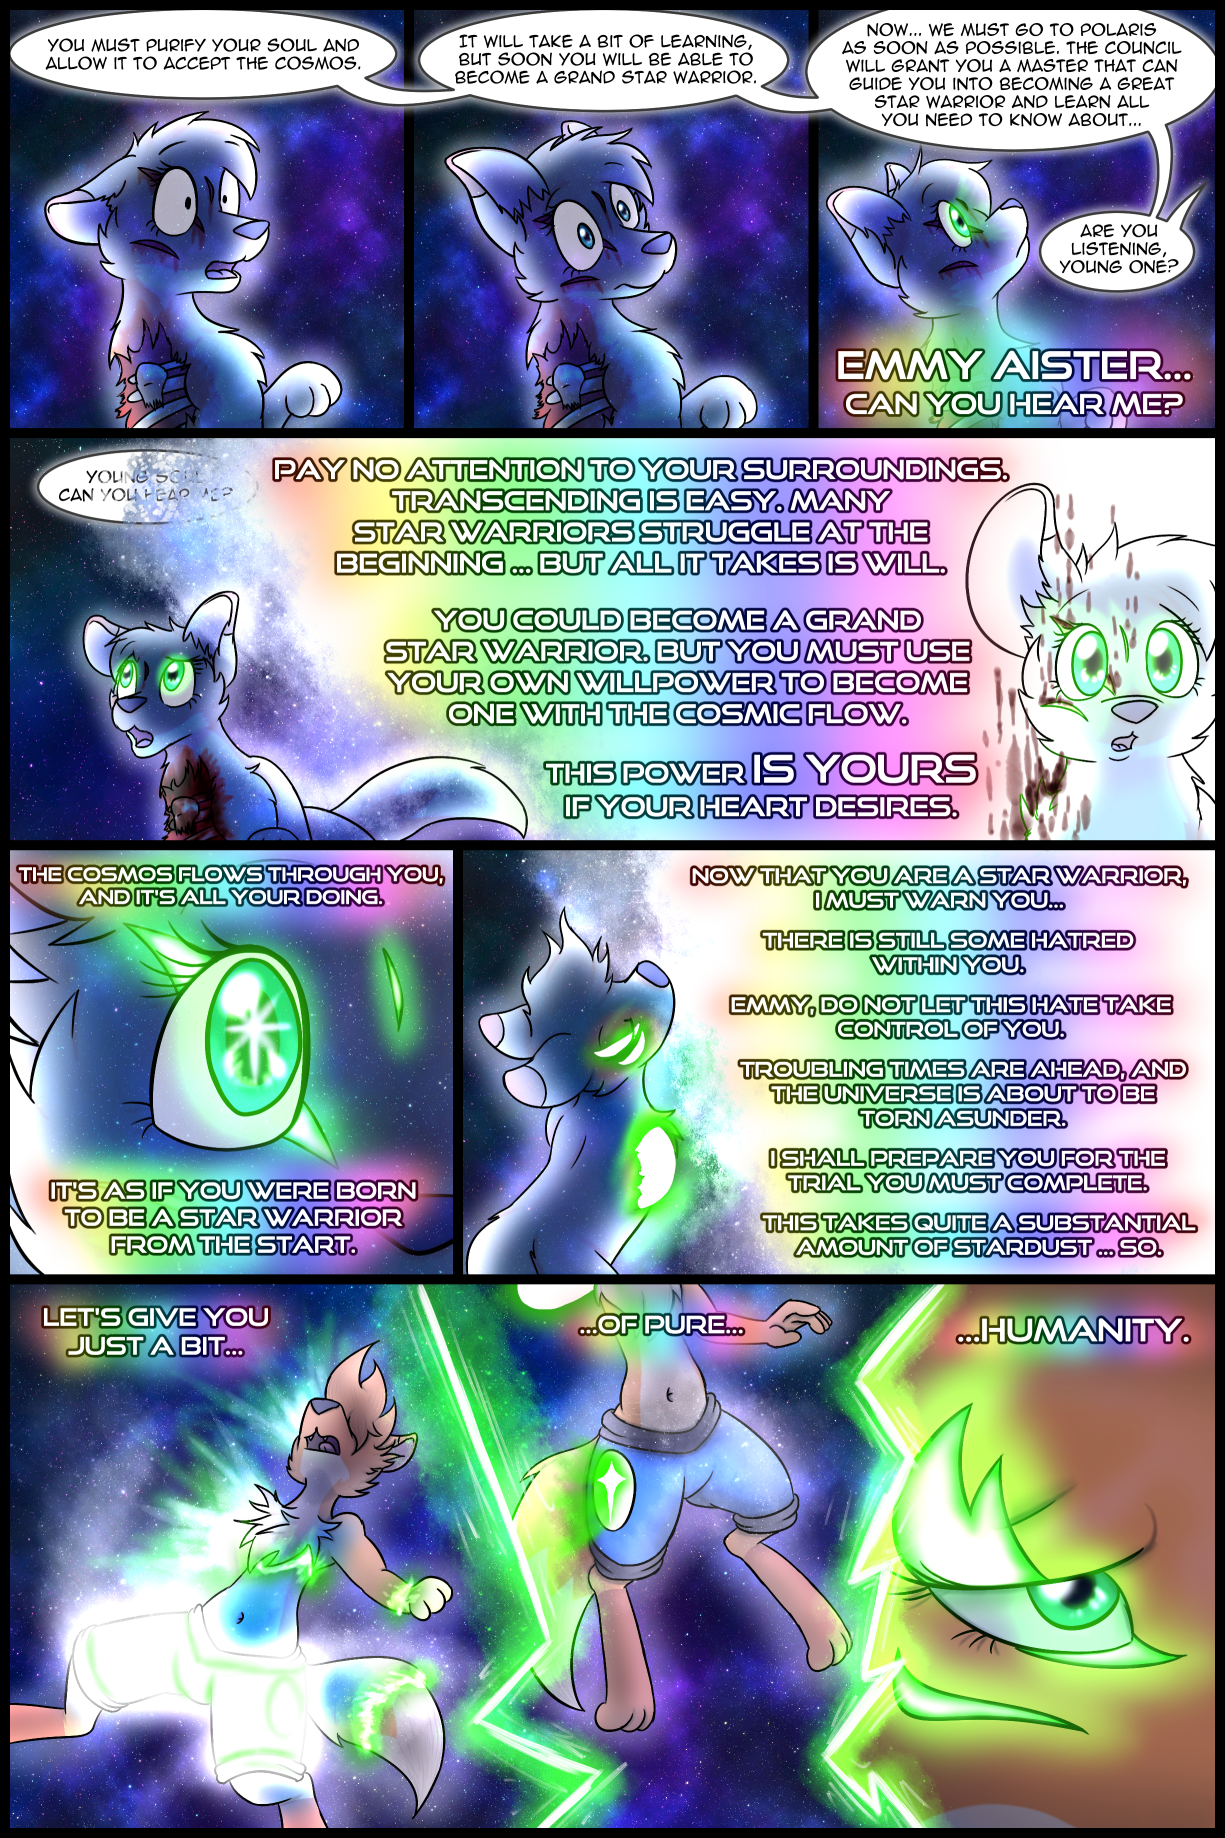 Ch1 Remastered Page 20-21 – Willpower is the key – Transformation